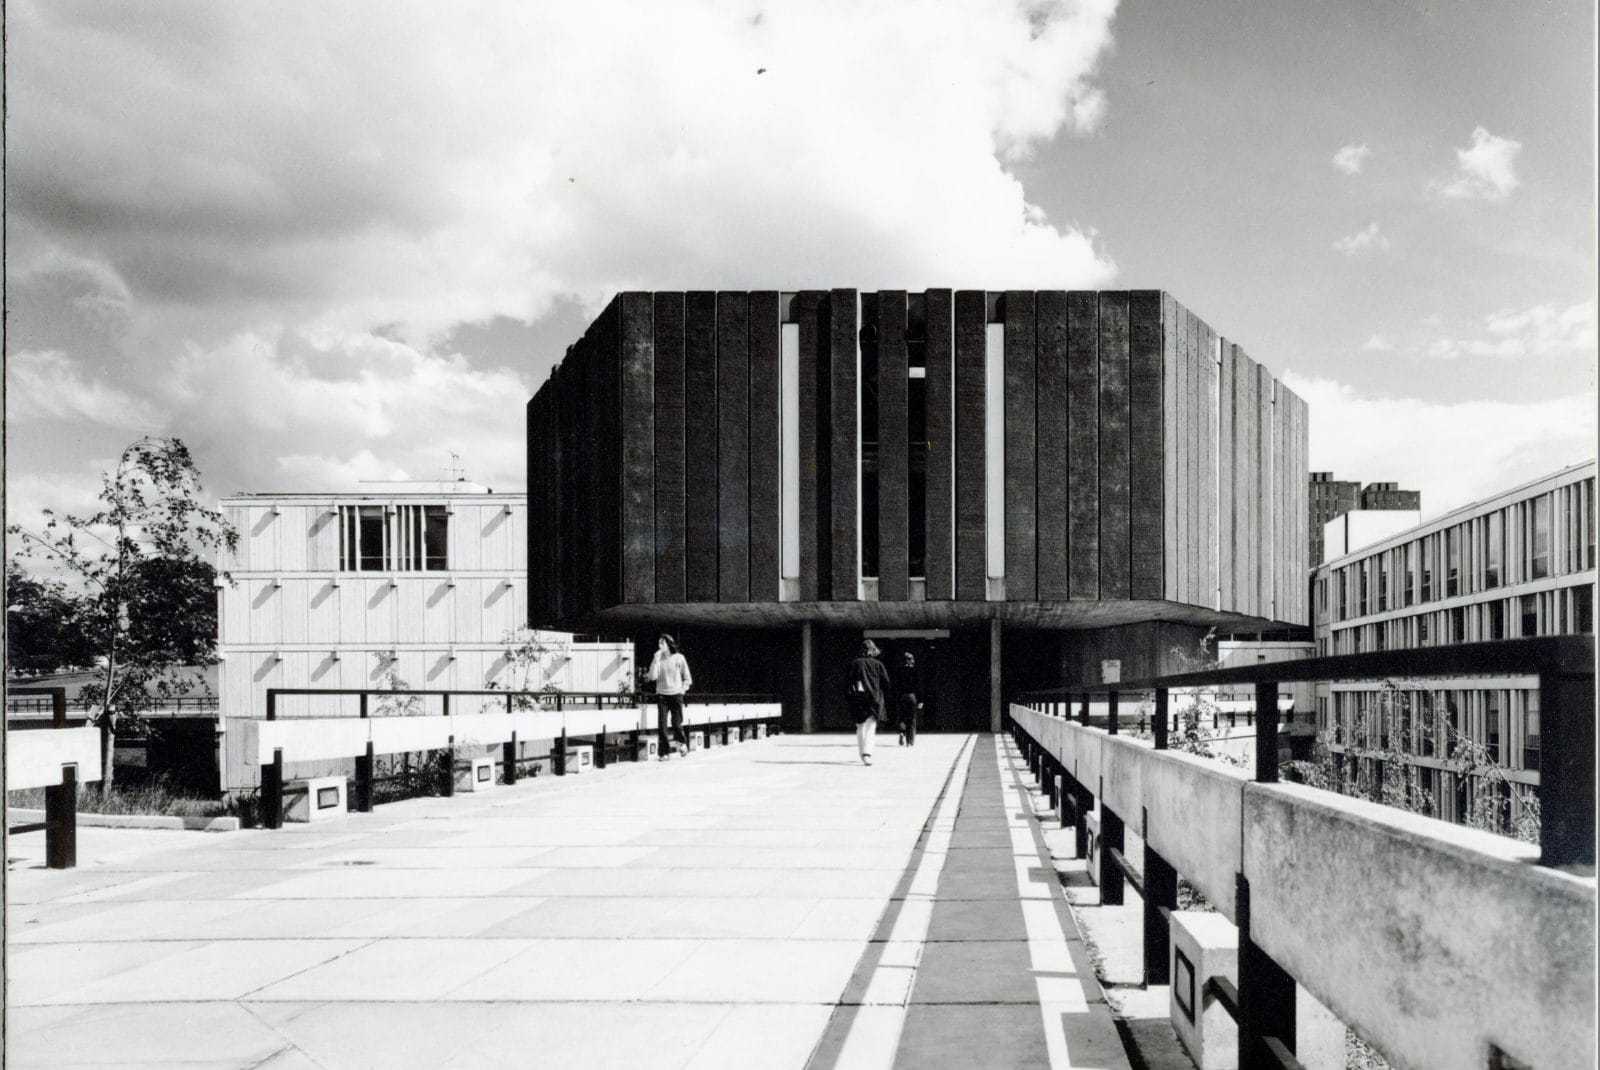 Black and white photograph taken in the early years of the University of Essex. The Hex is a hexagonal shaped building in the style of Brutalist architecture. 